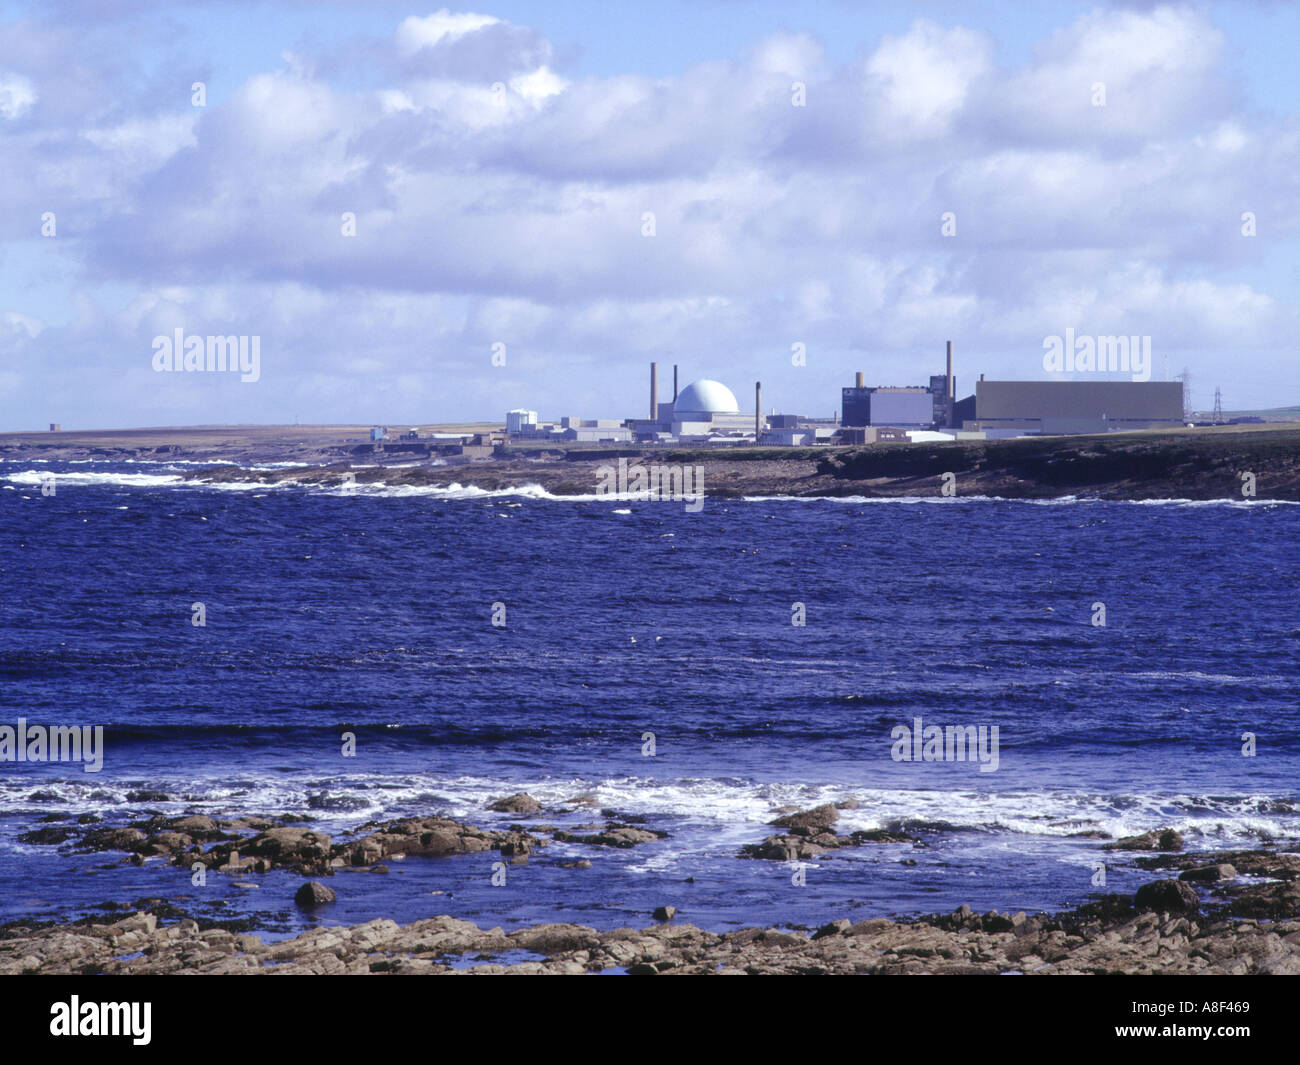 dh Nuclear Power station DOUNREAY CAITHNESS Scottish Atomic Reactor Electricity uk Sandside Bay Scotland coast fusion Stock Photo